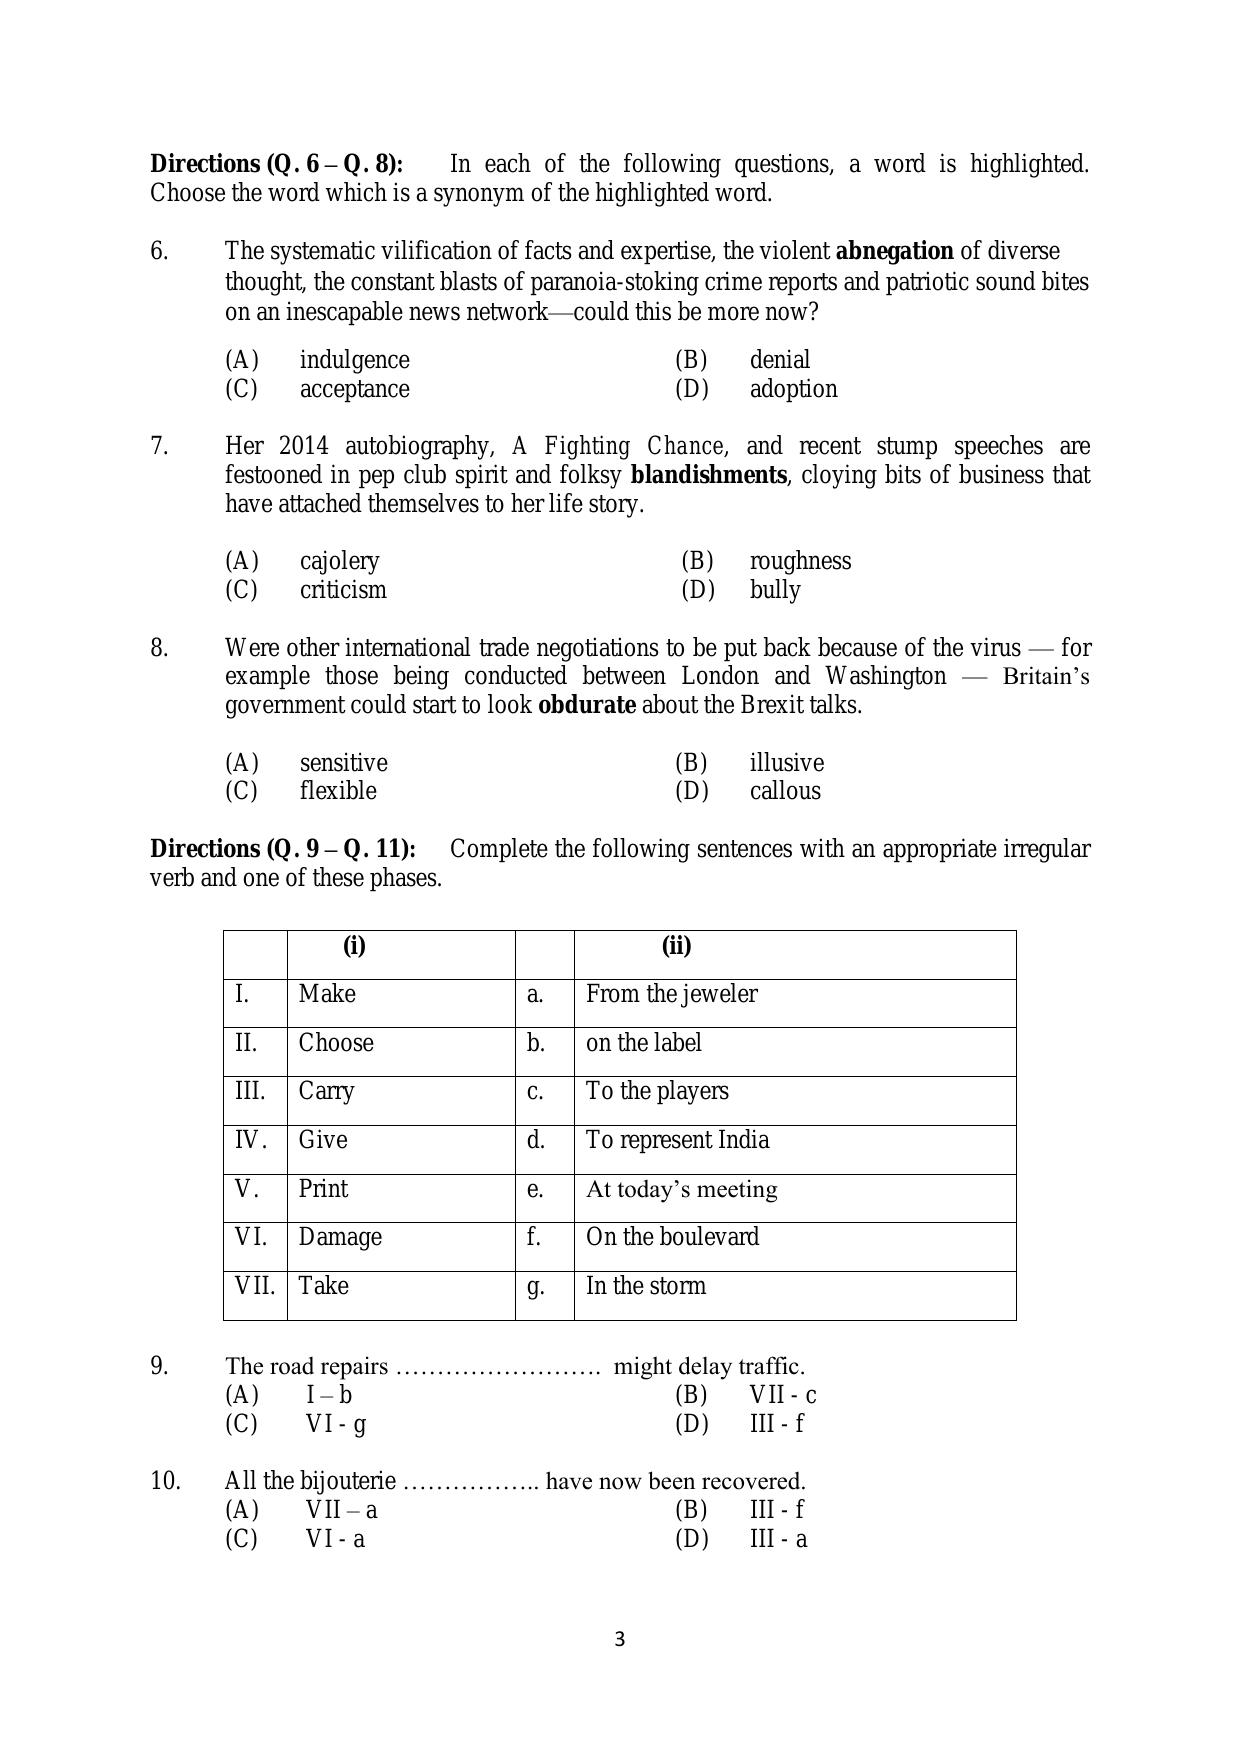 AILET 2020 Question Paper for BA LLB - Page 3